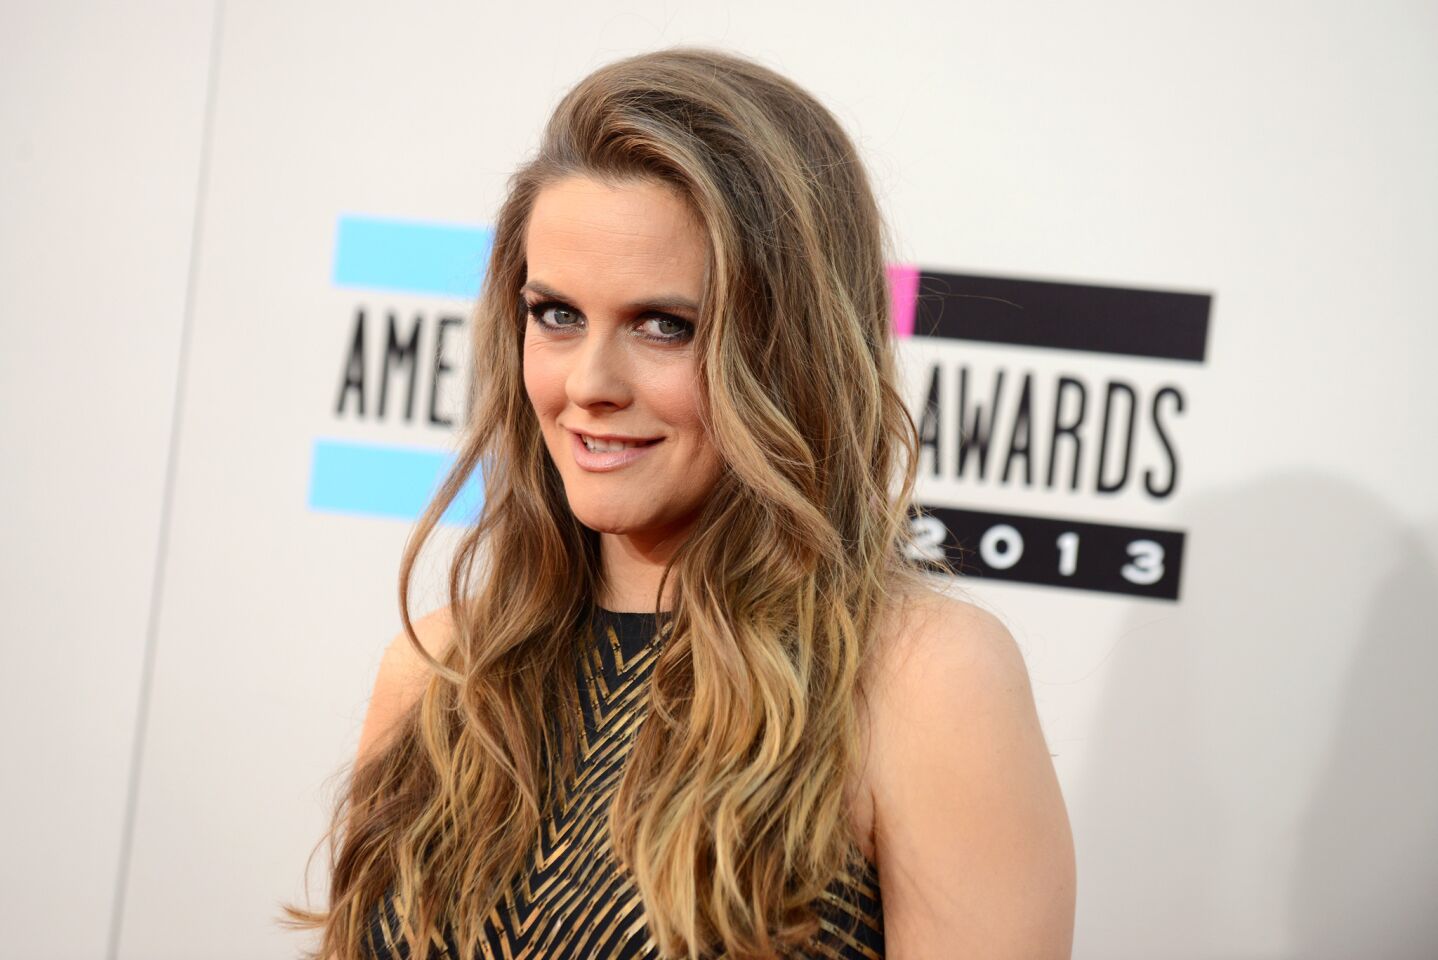 Celeb: Alicia Silverstone Company: First Kiss Productions Select projects: "Queen B" and "Excess Baggage"